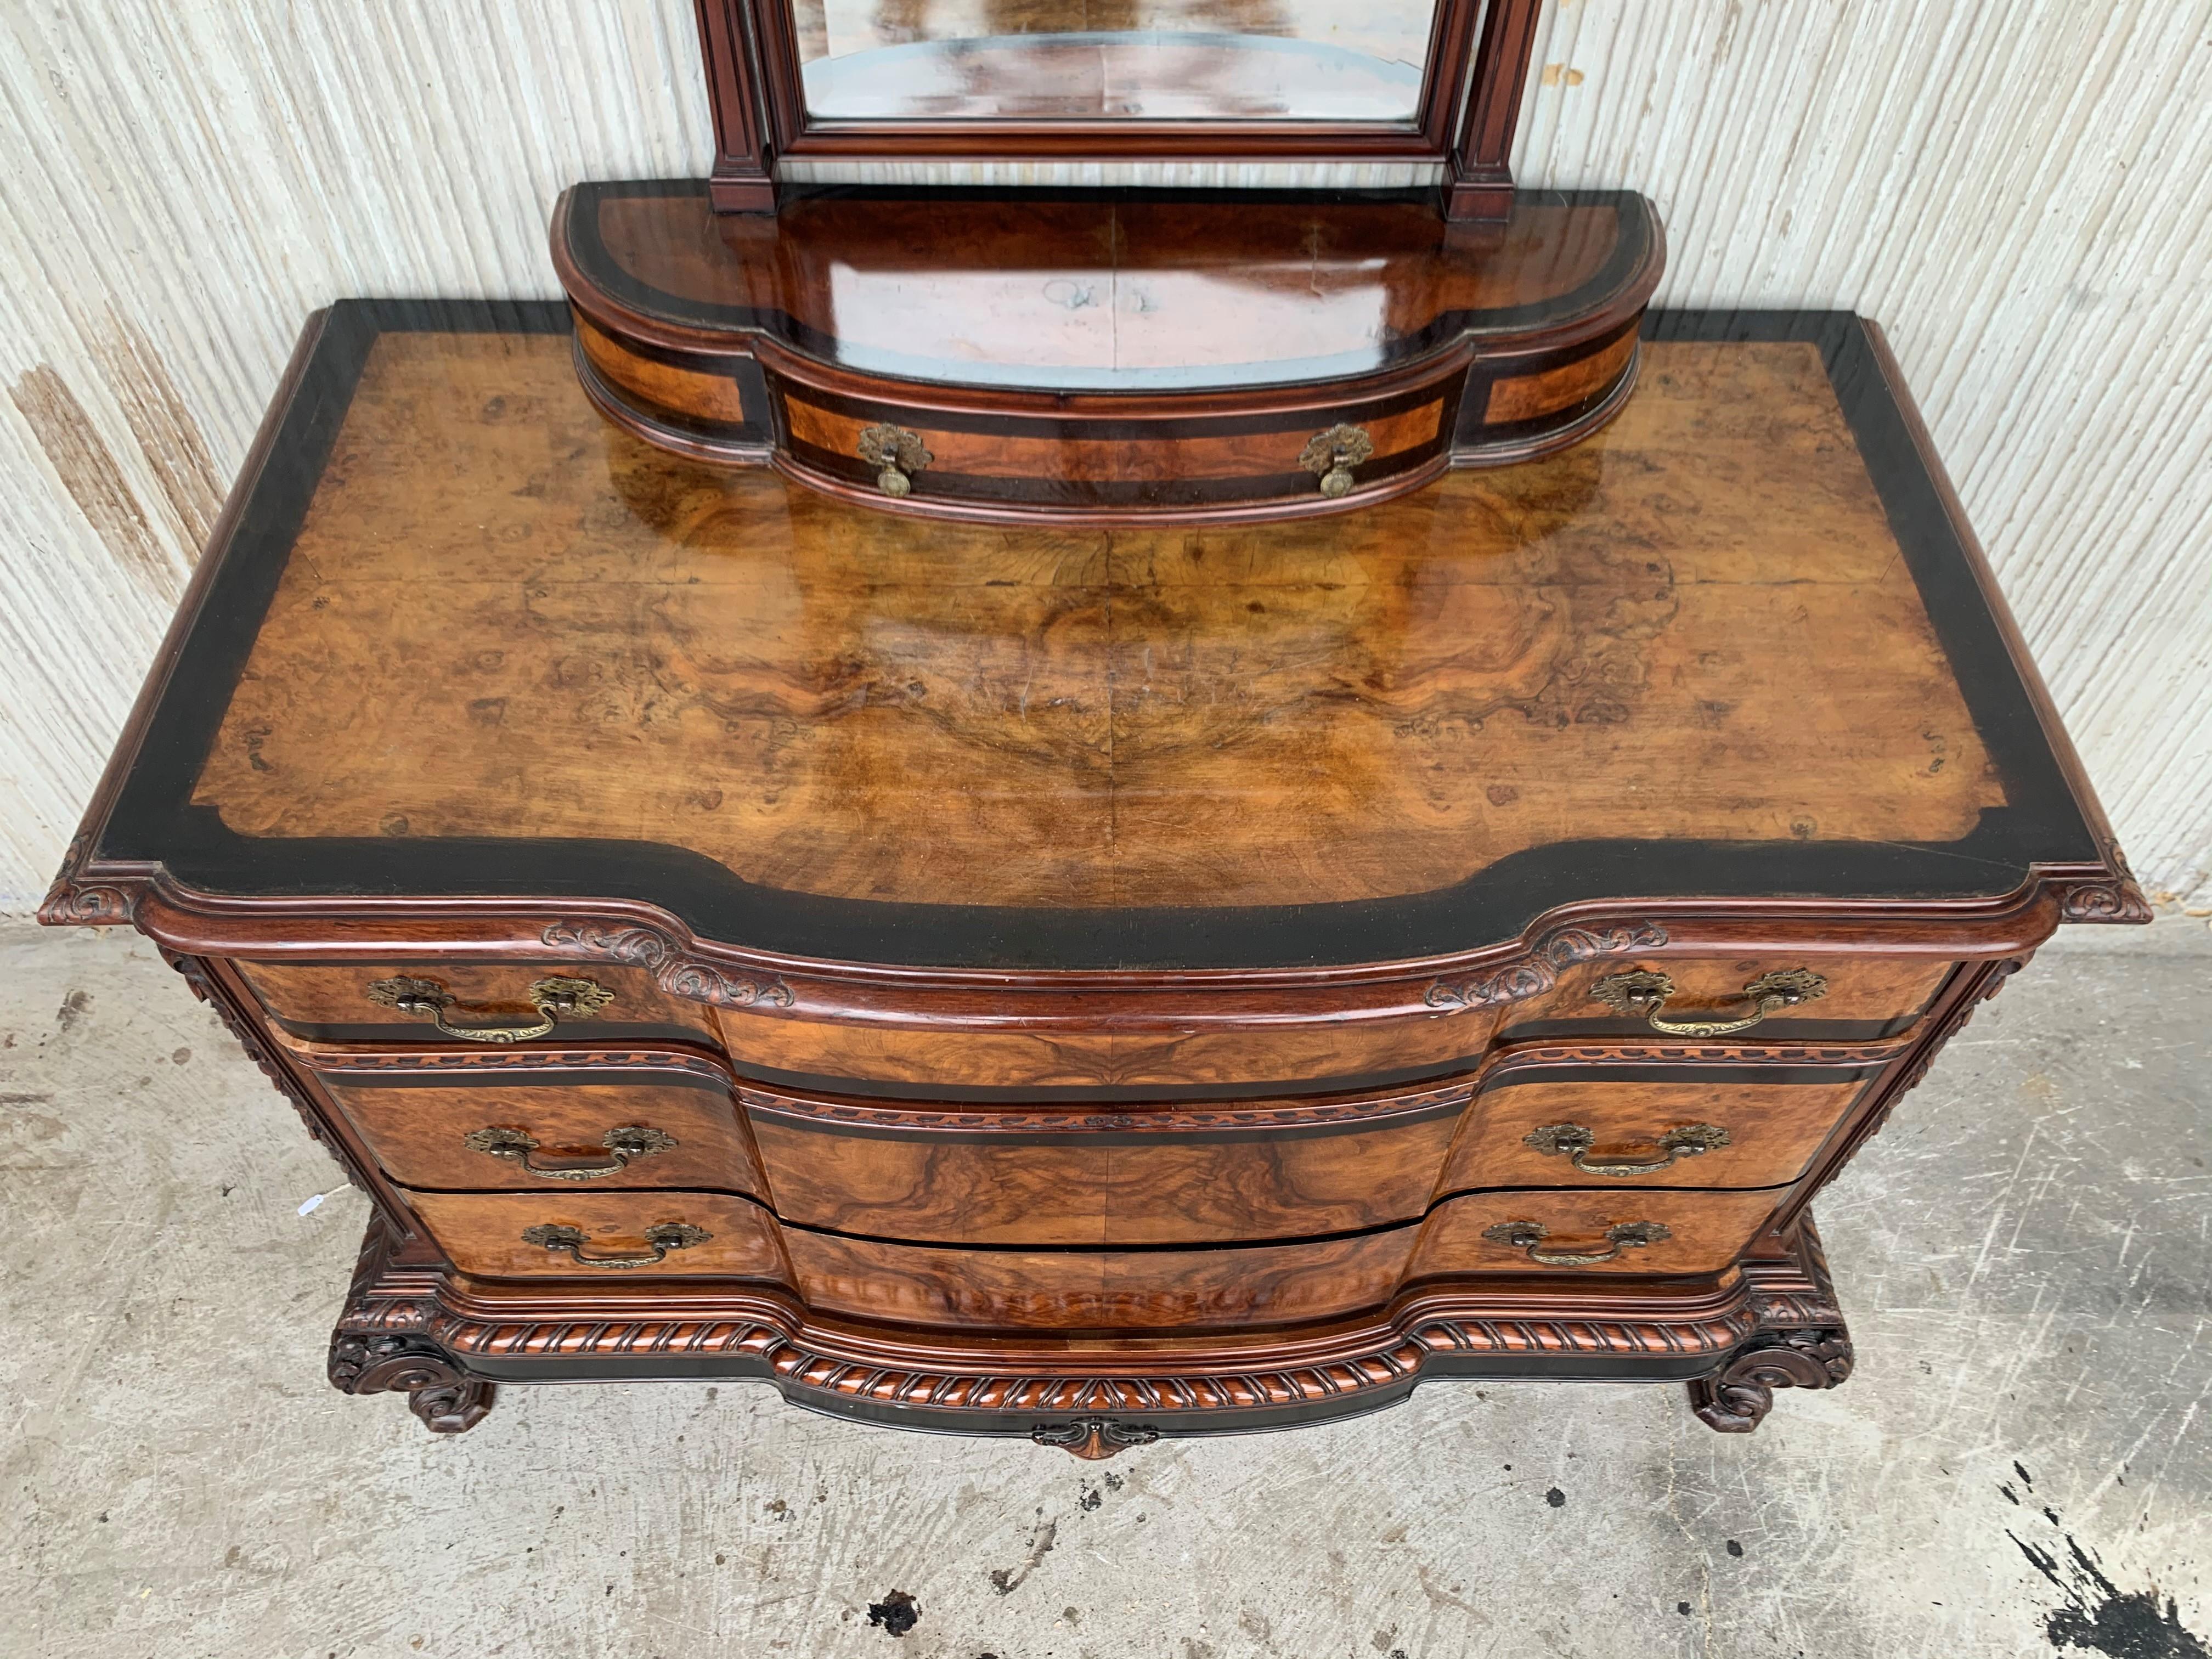 Louis XIV 1900s Venetian Baroque Commode Chest of Drawers in Burl Walnut with Ebonized Det For Sale